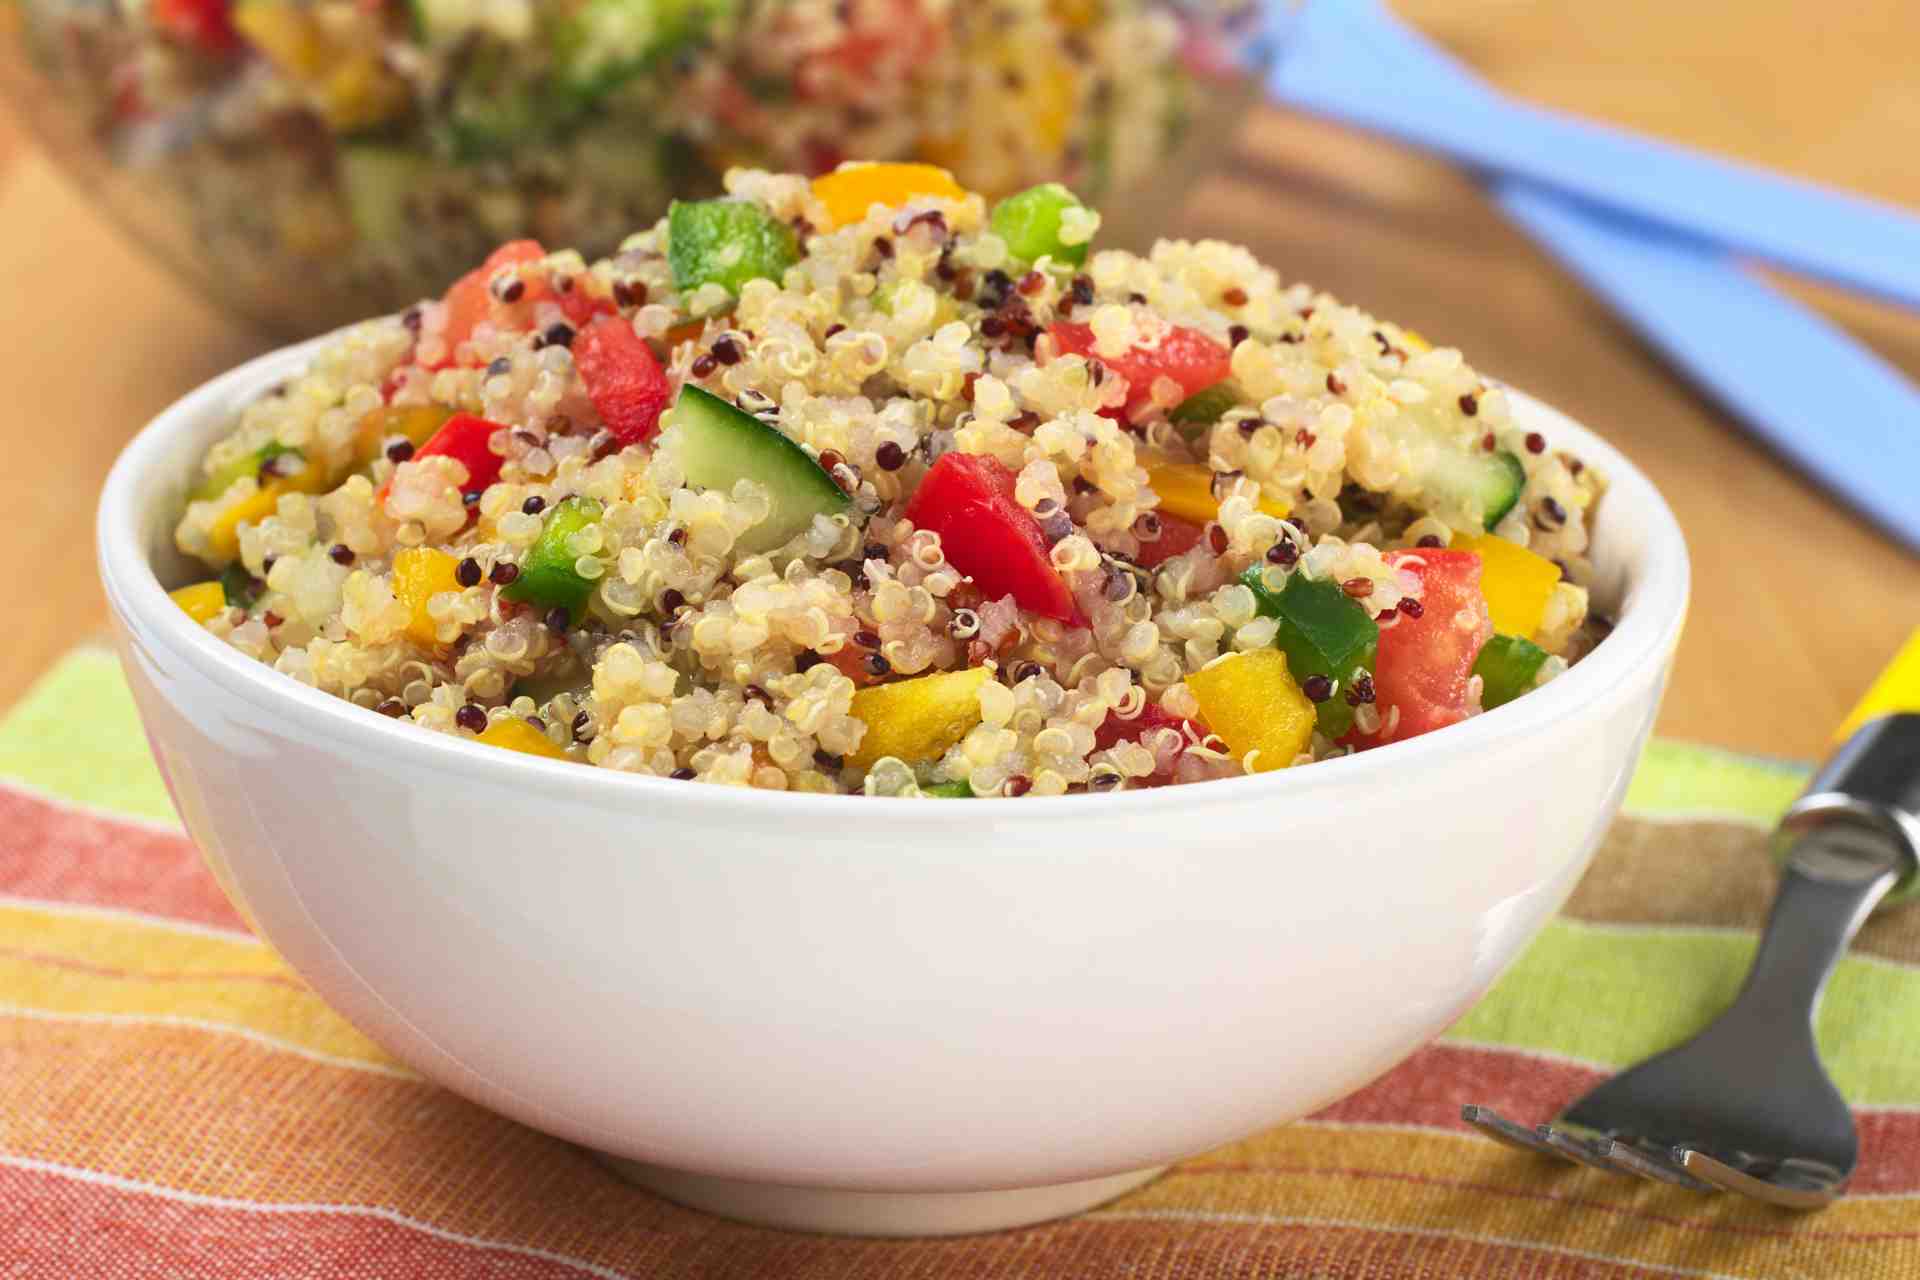 Quinoa salad with roasted vegetables tired of being fat